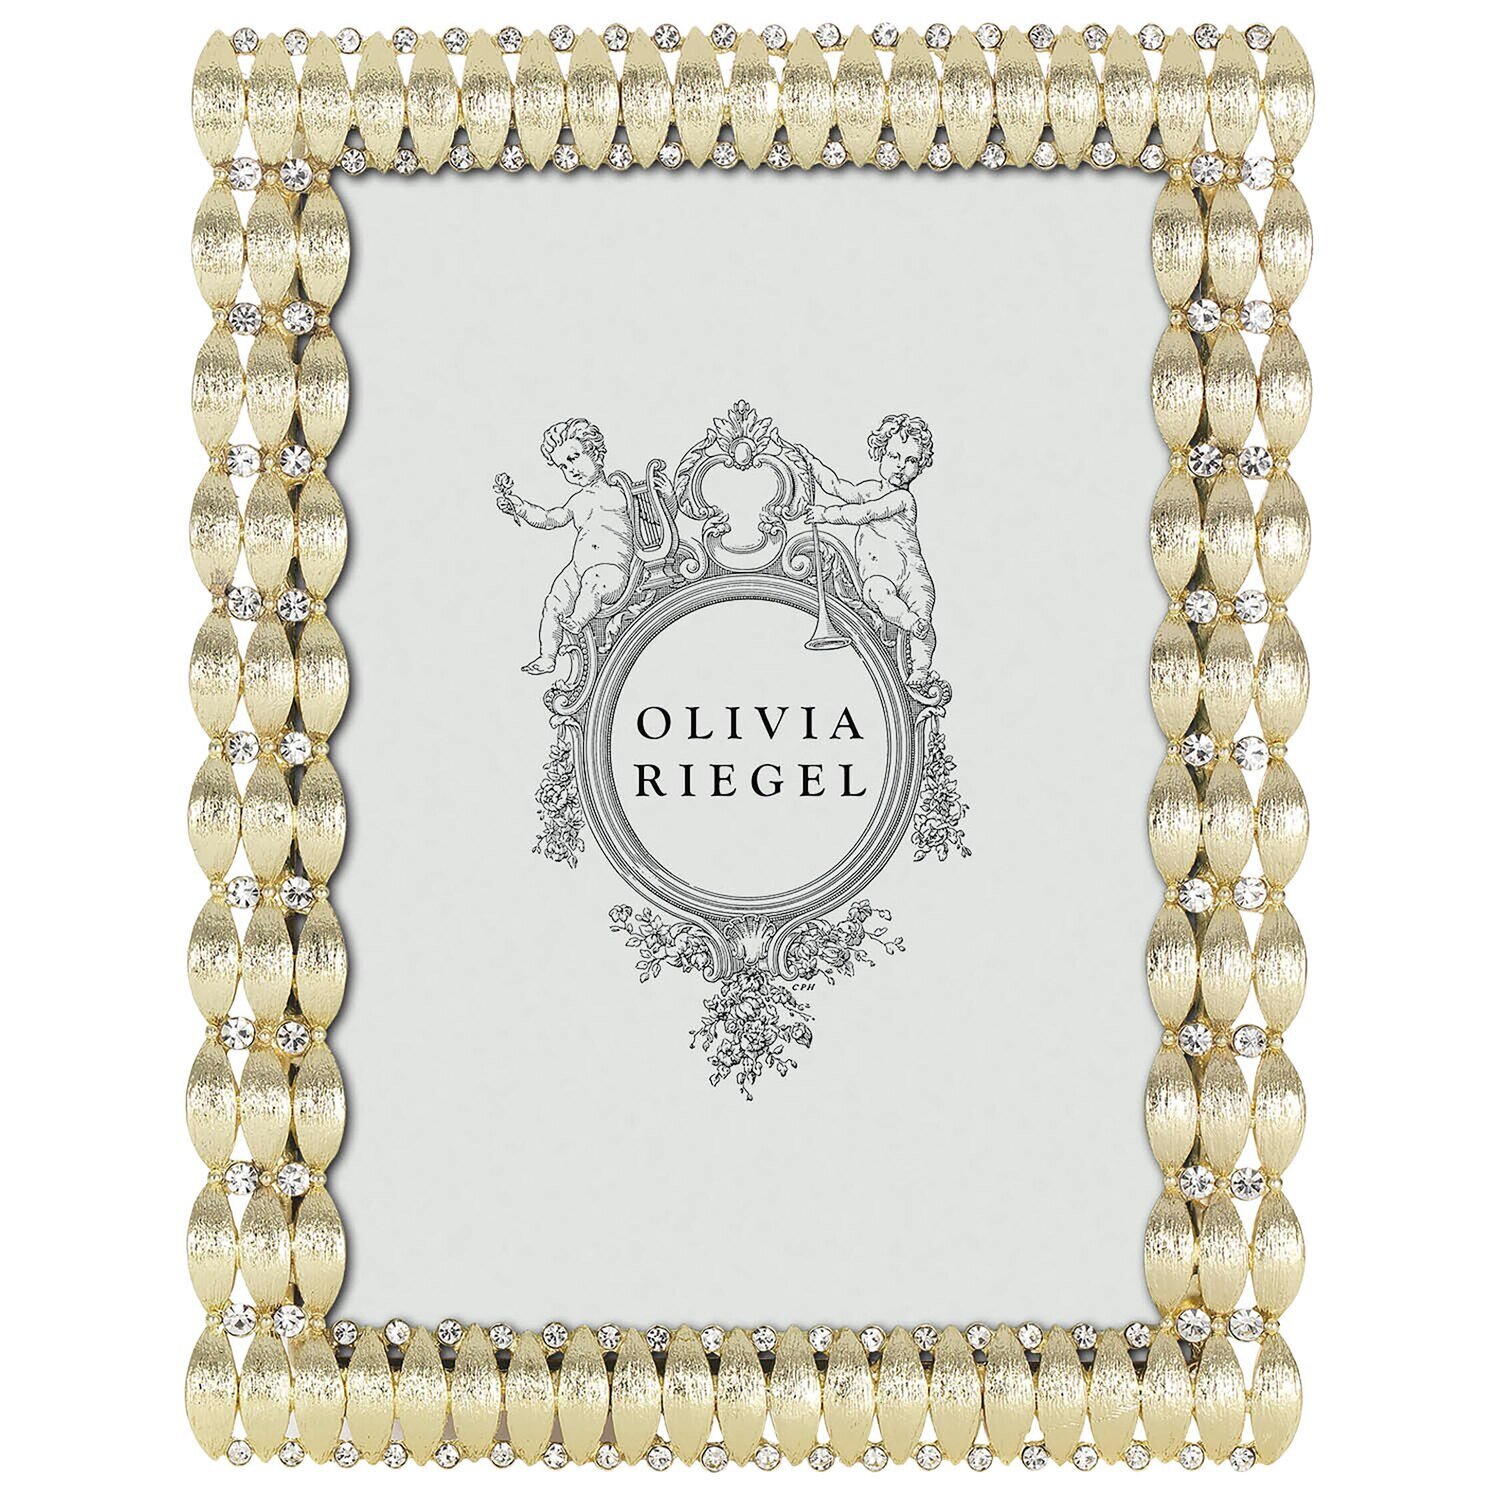 Olivia Riegel Gold Darby 5 x 7 Inch Picture Frame RT4766